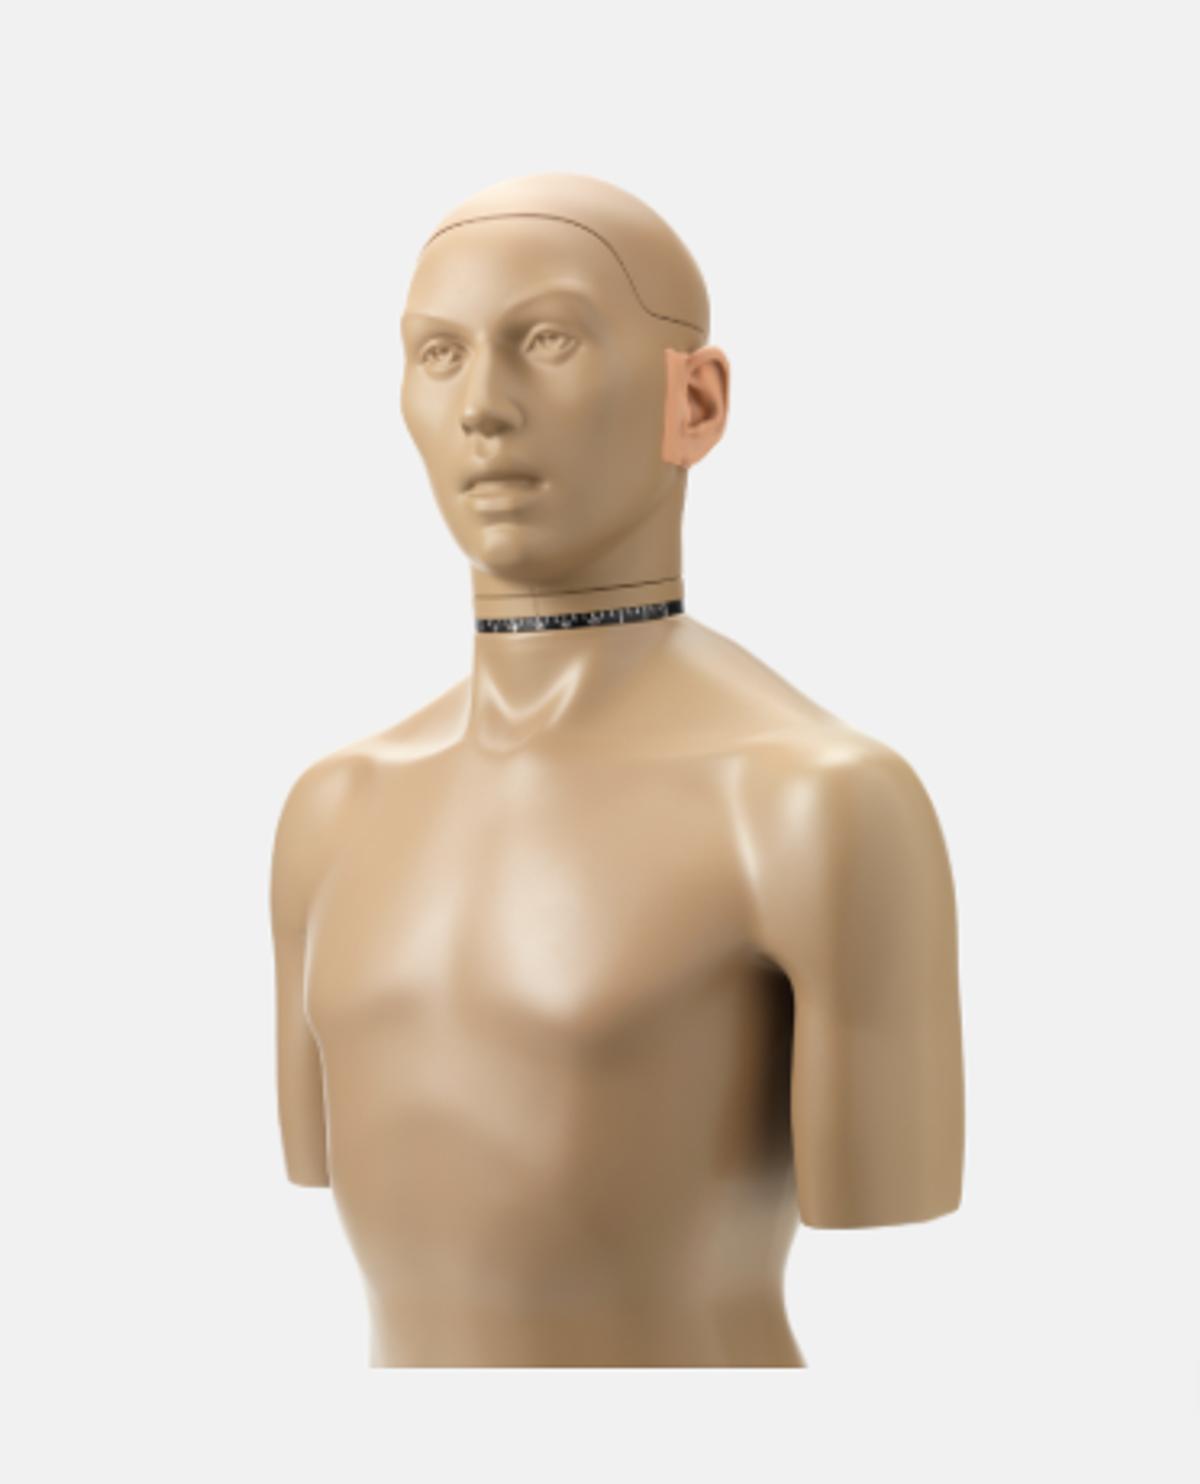 Example-of-a-dummy-head-and-torso.jpg